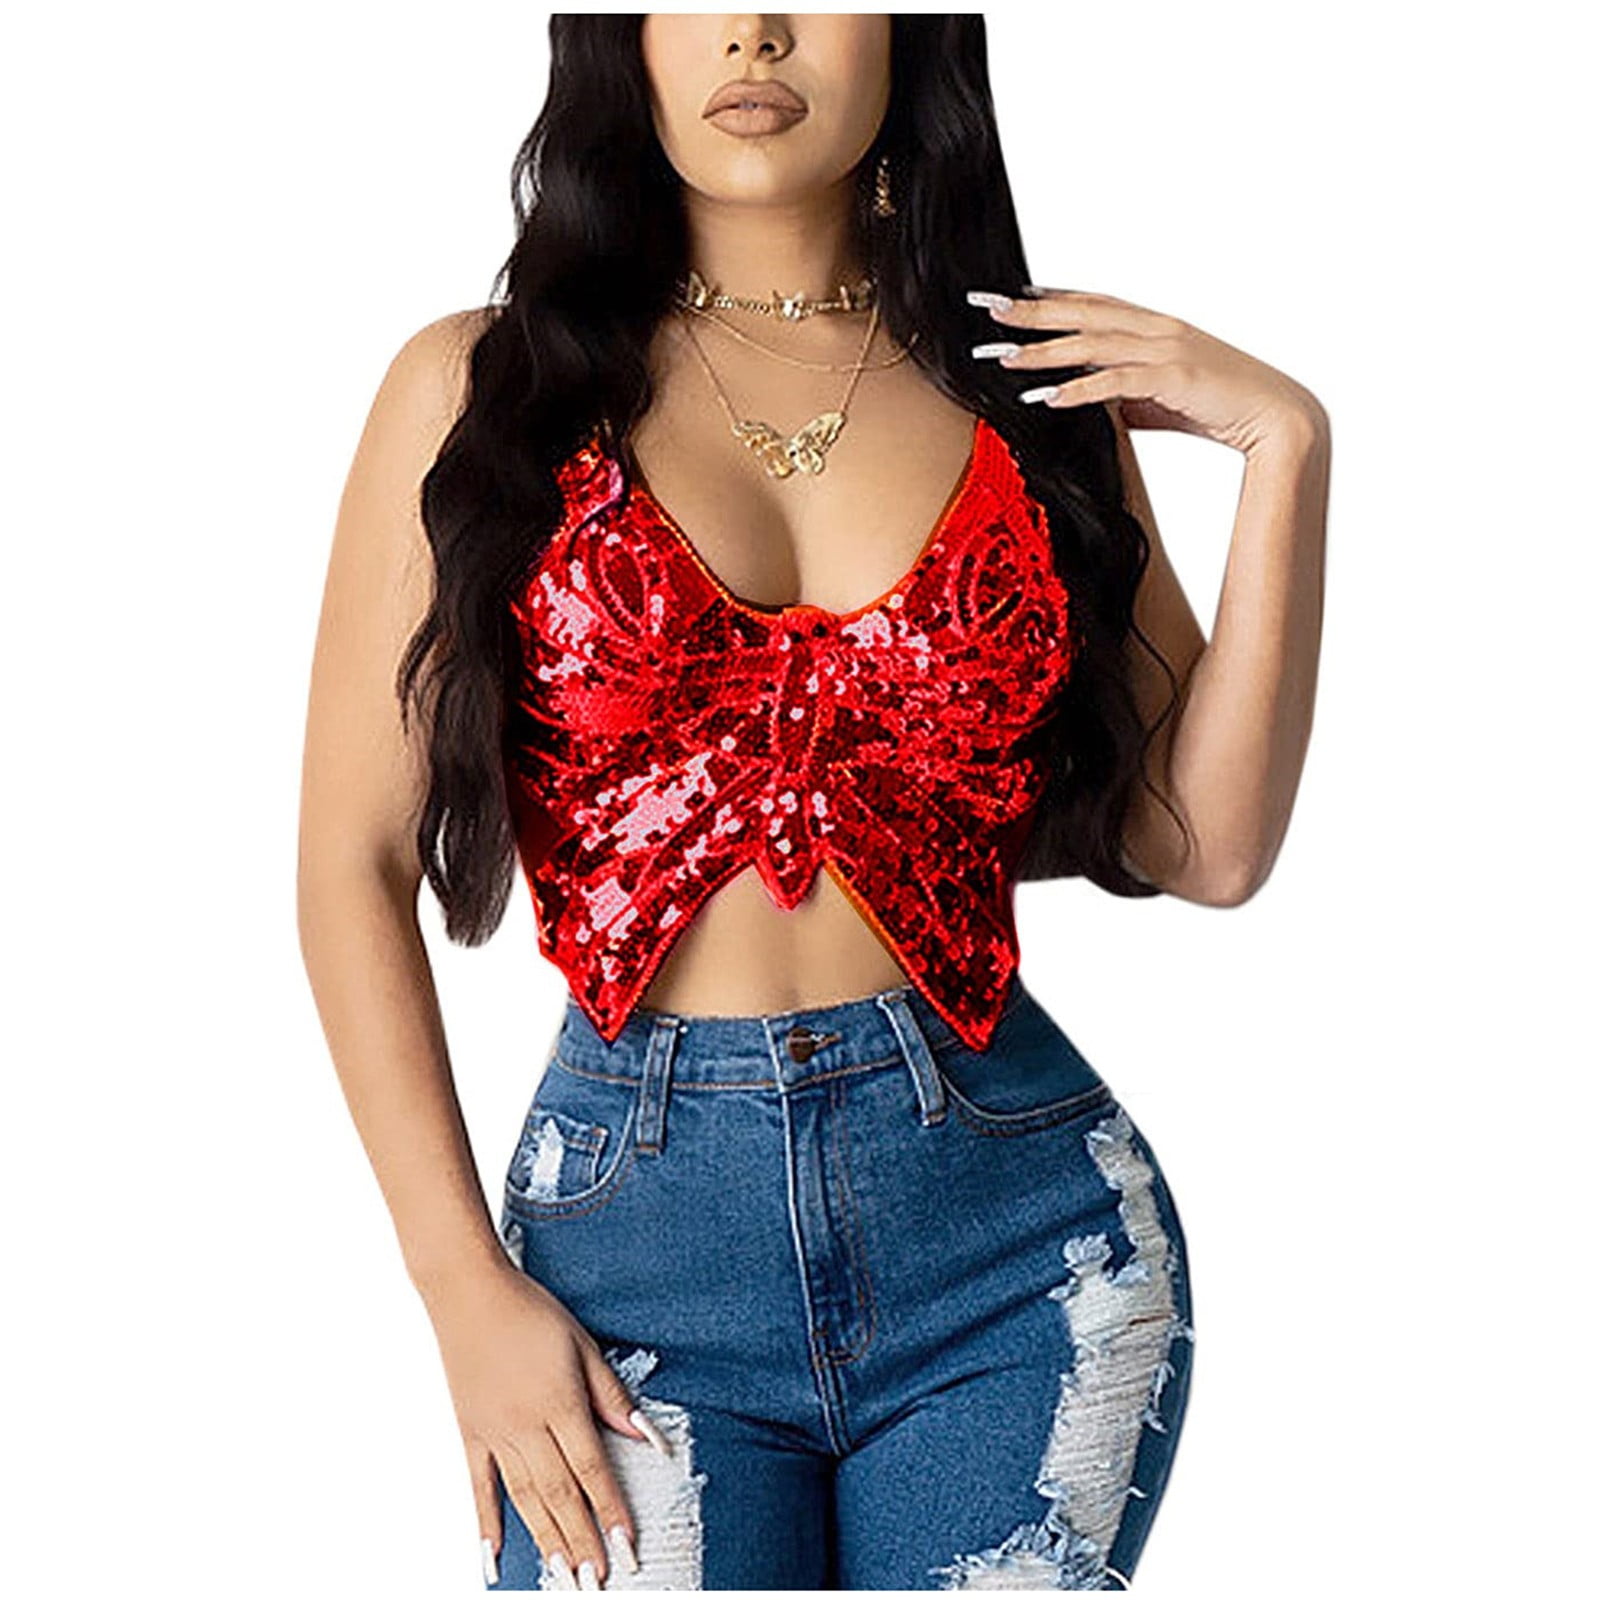 Yubnlvae Sequin Tops for Women, Women's Sparkly Sequin Crop Top Bandage Bra  Belly Dance Vest Tank Outfits Red, Mardi Gras 